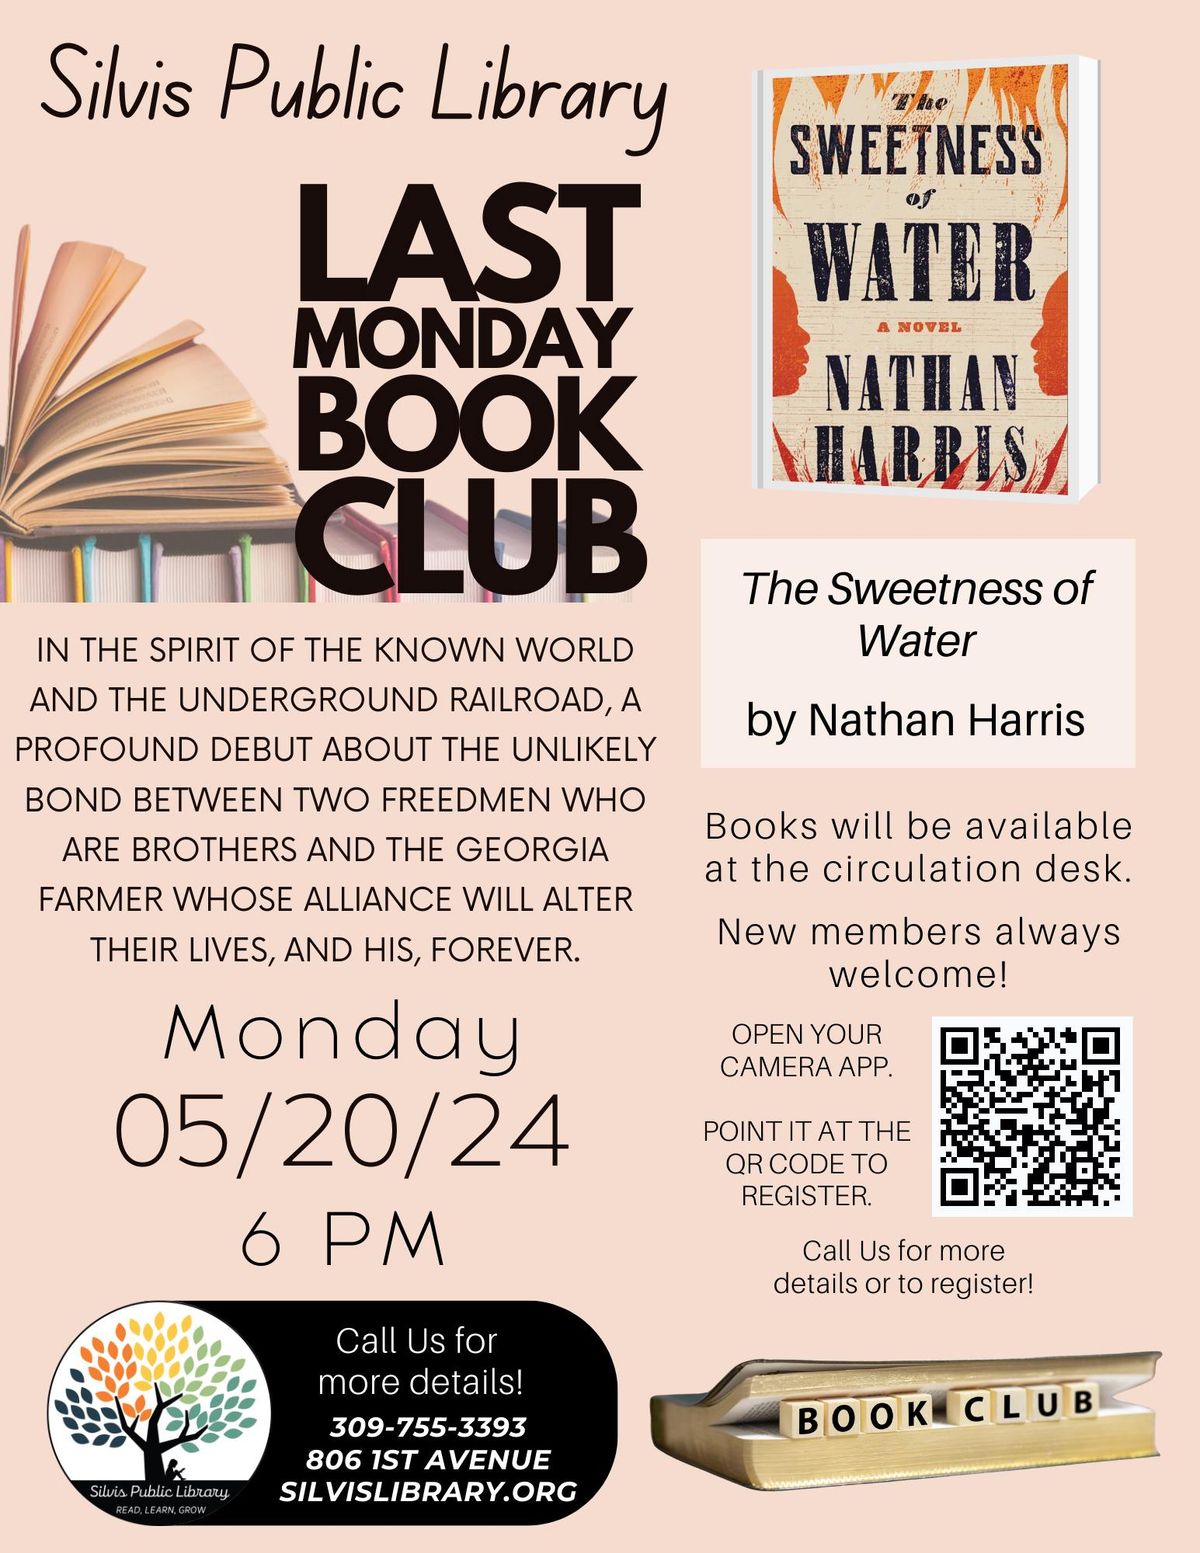 Last Monday Book Club: "The Sweetness of Water" by Nathan Harris